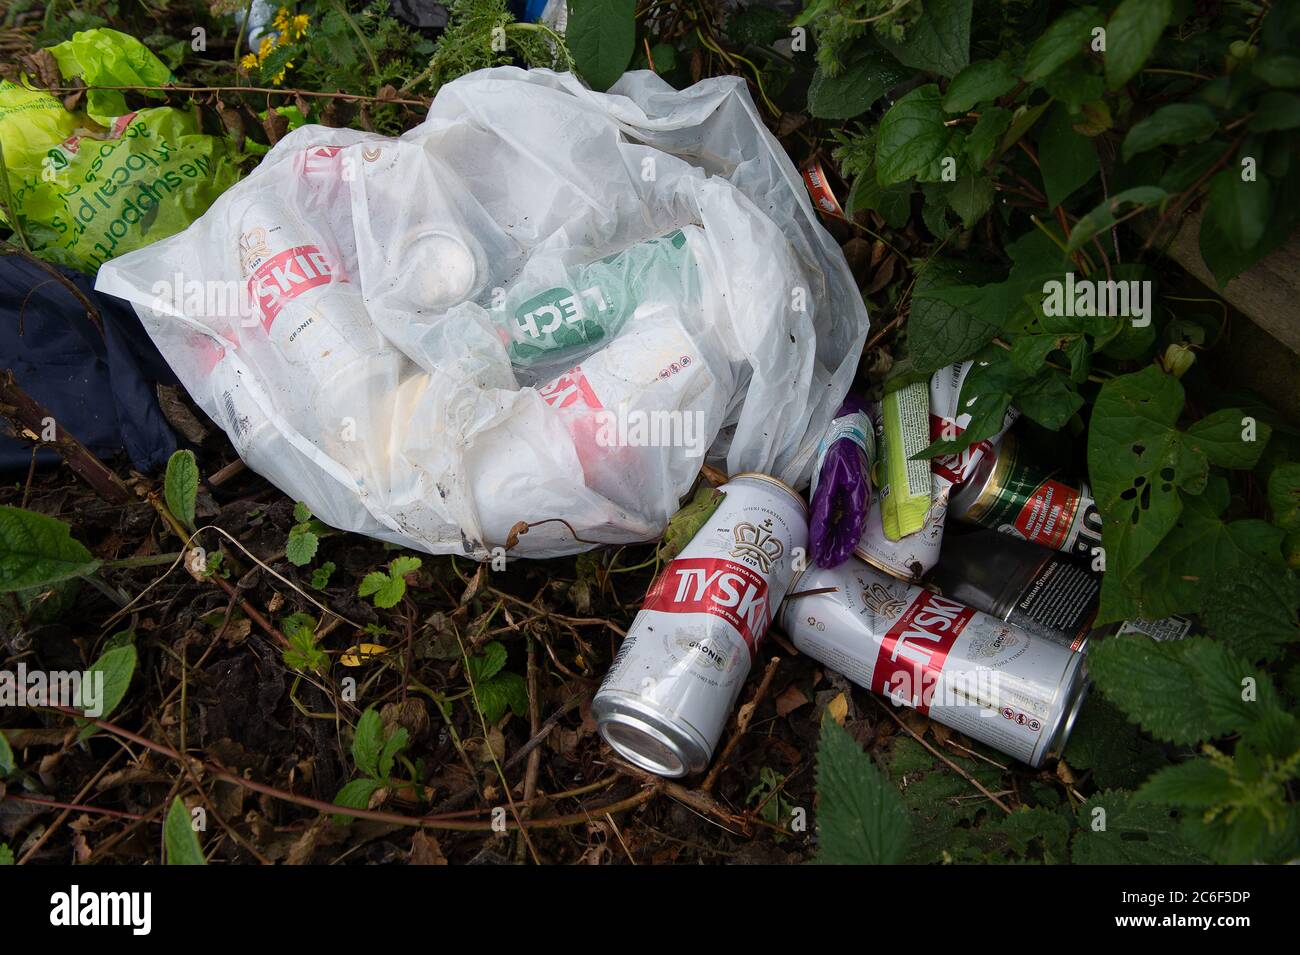 slough-berkshire-uk-9th-july-2020-empty-beer-cans-left-by-the-jubilee-river-in-slough-berkshire-the-amount-of-litter-in-beauty-spots-has-increased-massively-during-the-coronavirus-pandemic-as-some-people-drink-more-alcohol-out-of-boredom-credit-maureen-mcleanalamy-2C6F5DP.jpg